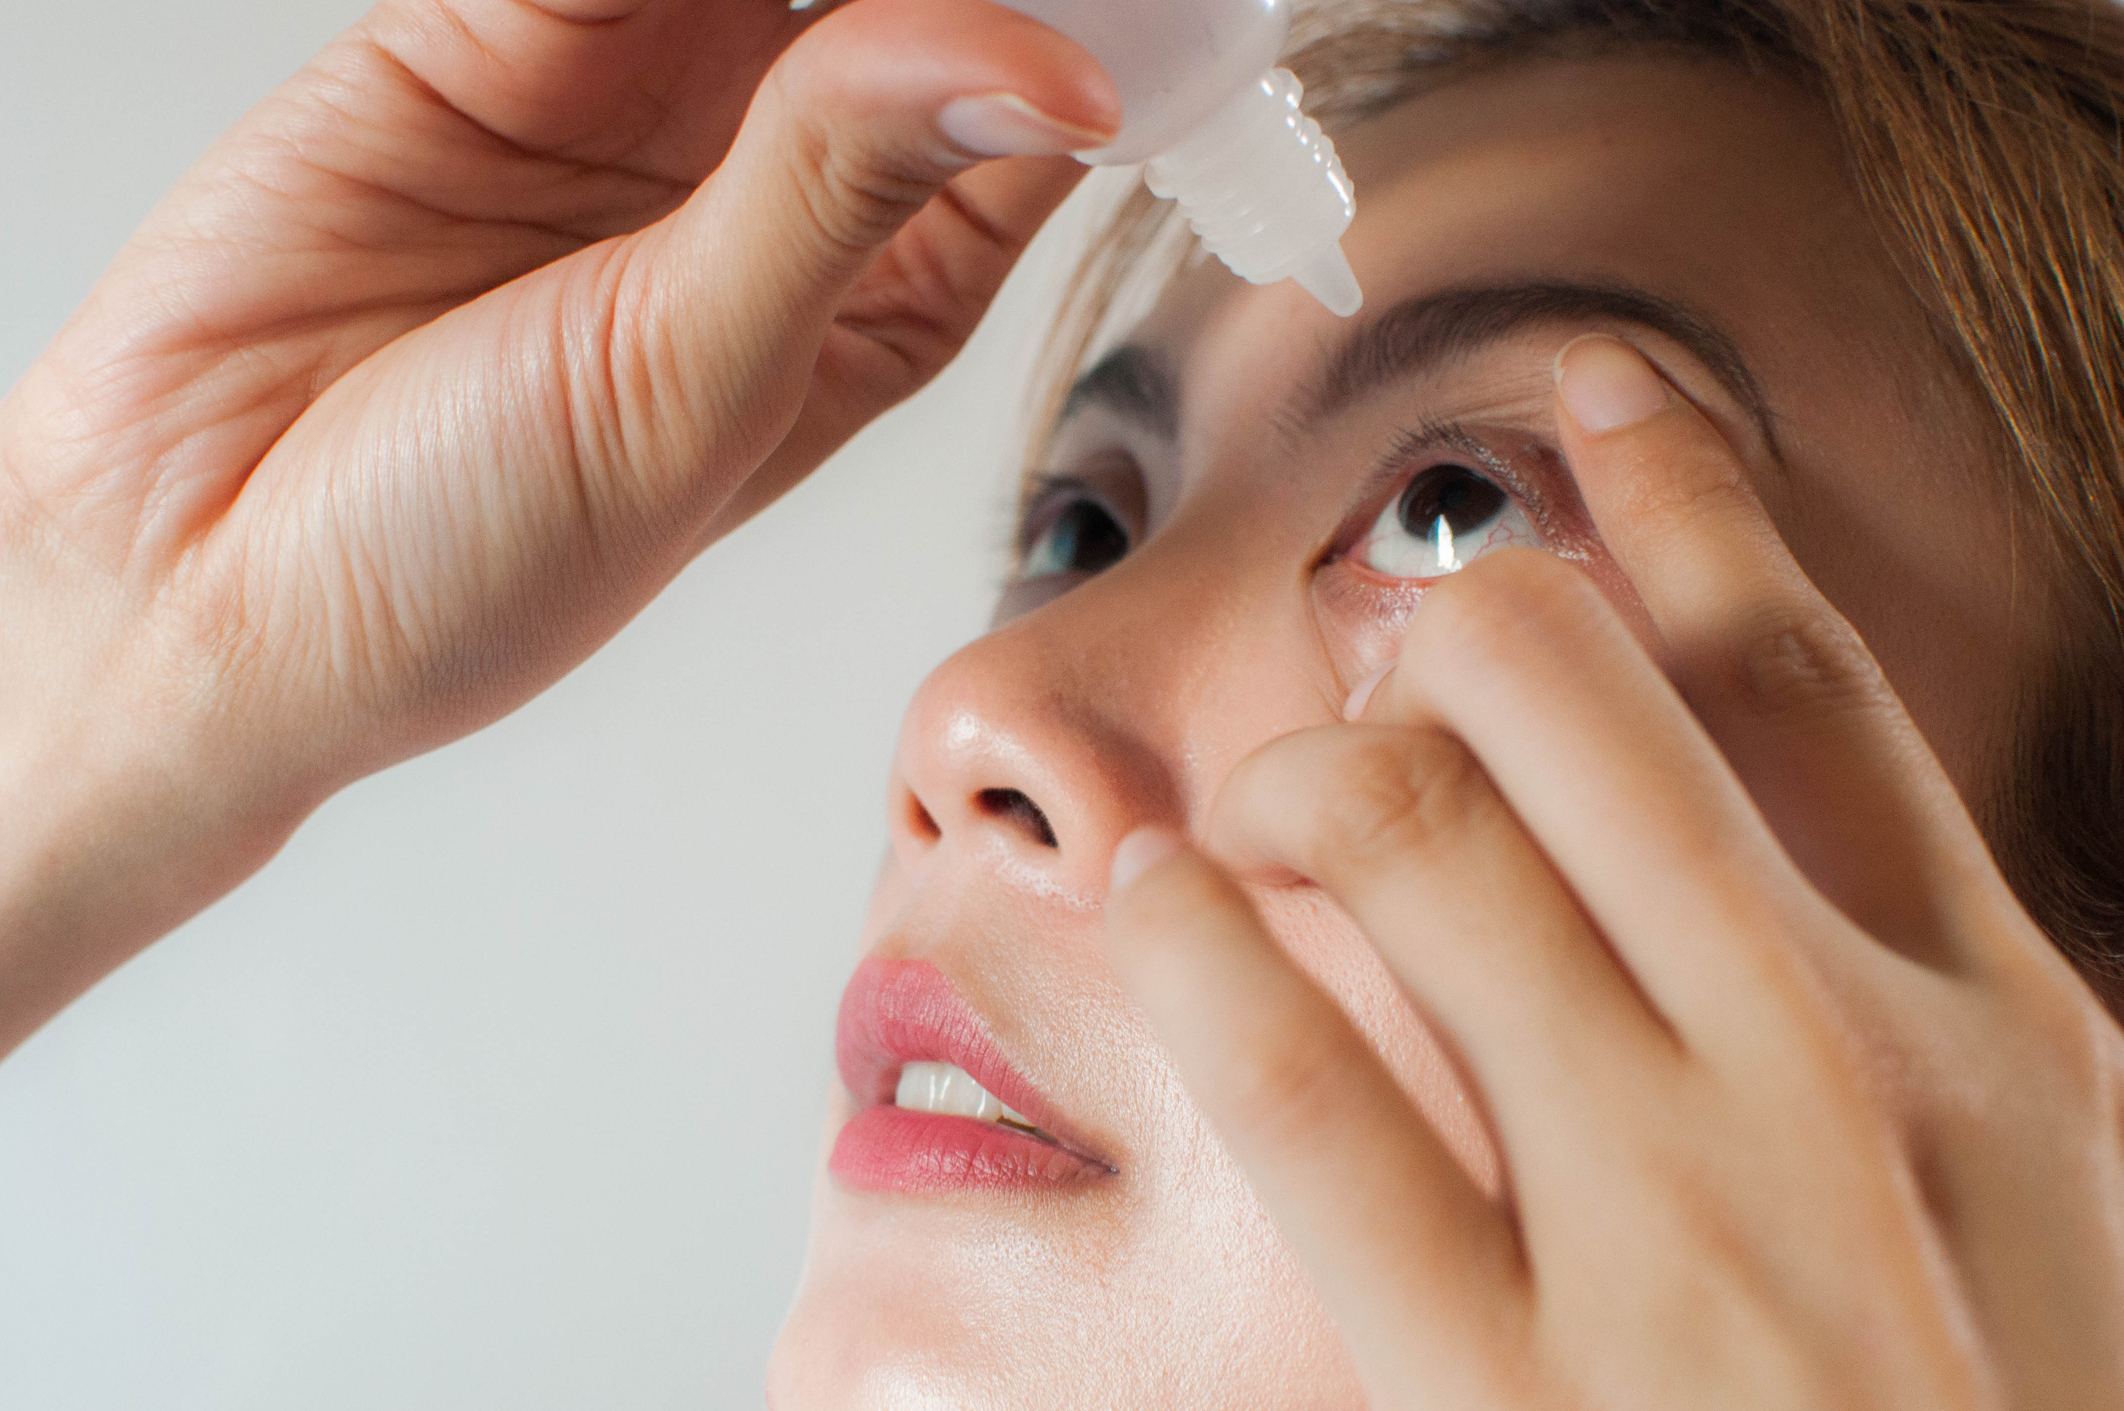 Eye Doctor Reveals Product To Avoid For Eye Health